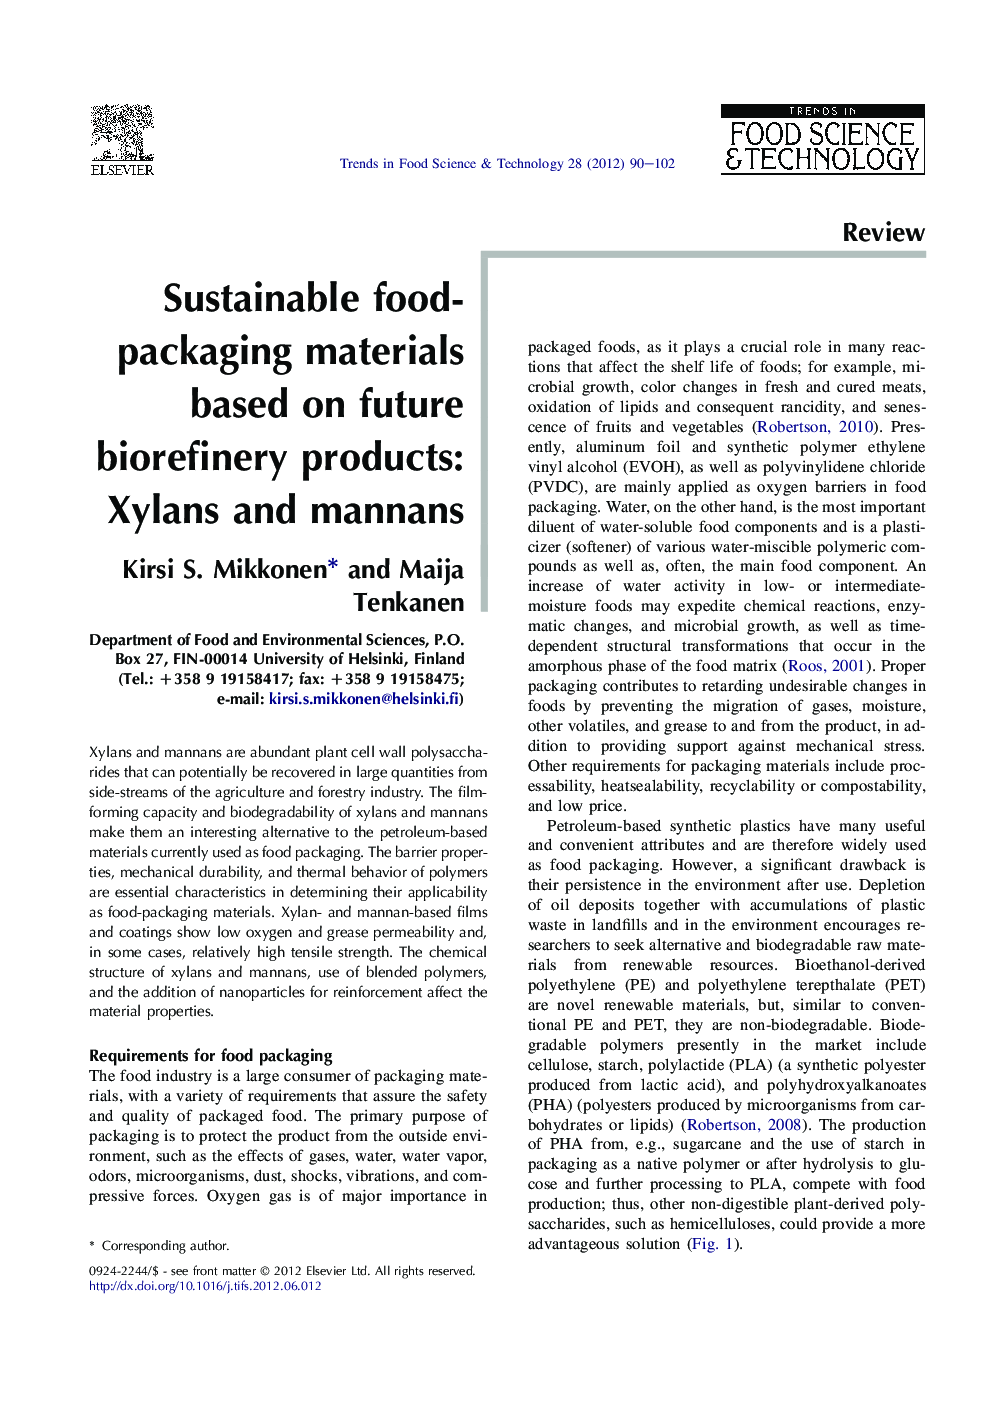 Sustainable food-packaging materials based on future biorefinery products: Xylans and mannans